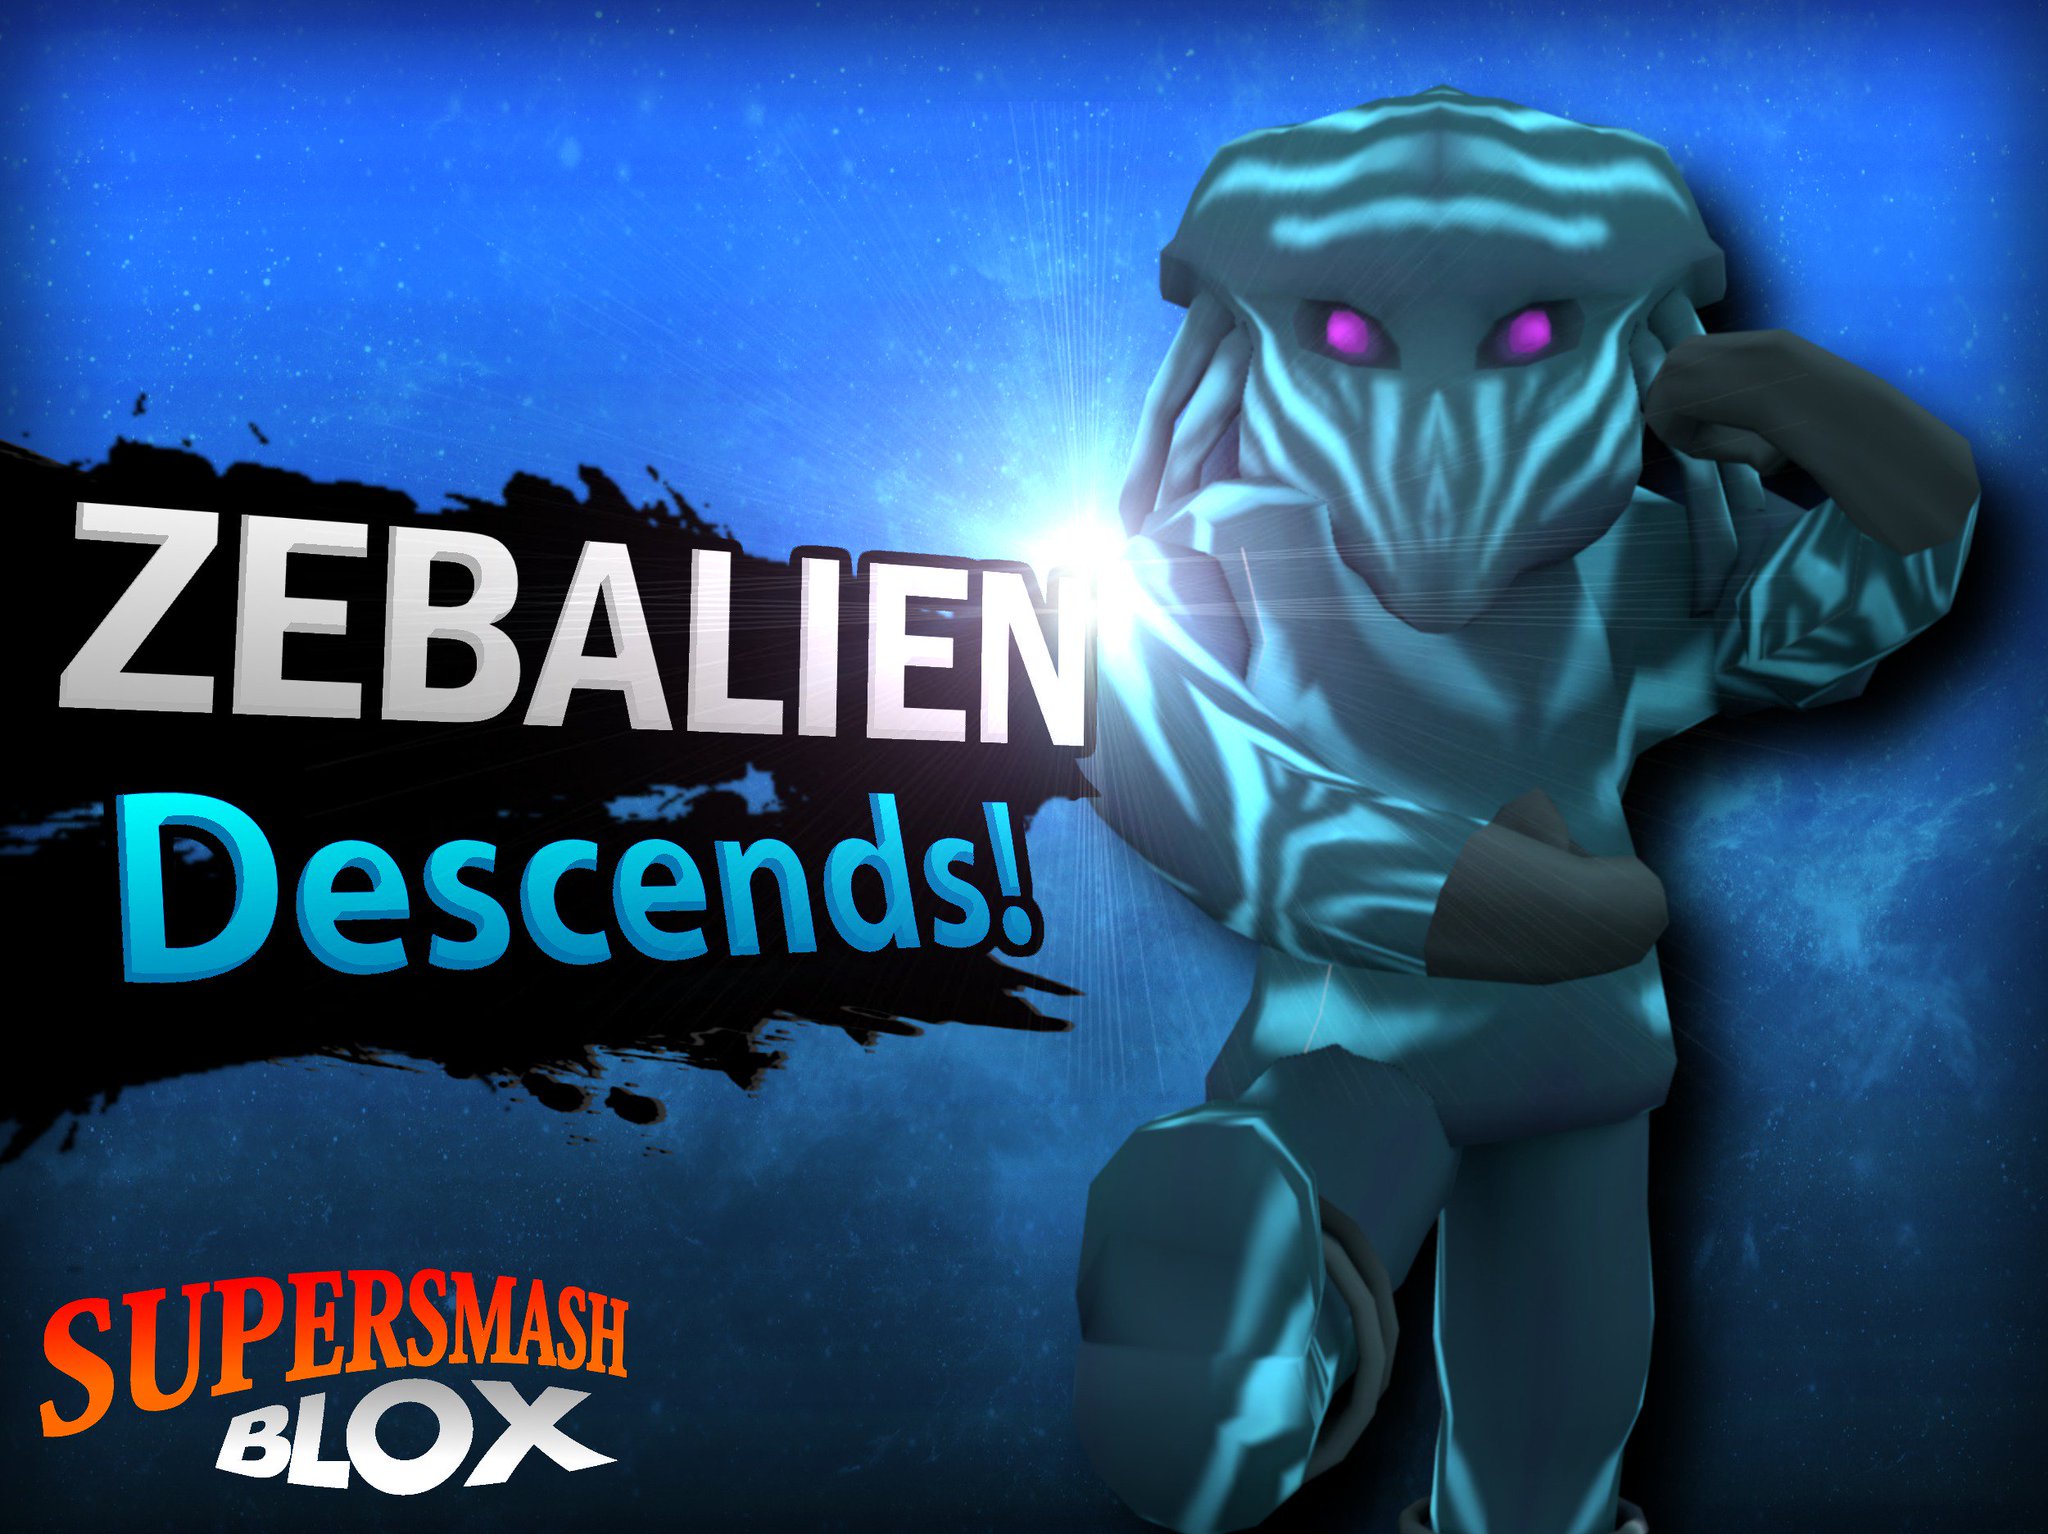 Super Smash Blox On Twitter Ssblox Picoftheday Here S The Splash Screen For The Character Zebalien Which Is Oriented Around Roblox S Sci Fi Items Community Https T Co K57nljpkwm - roblox super smash bros blox